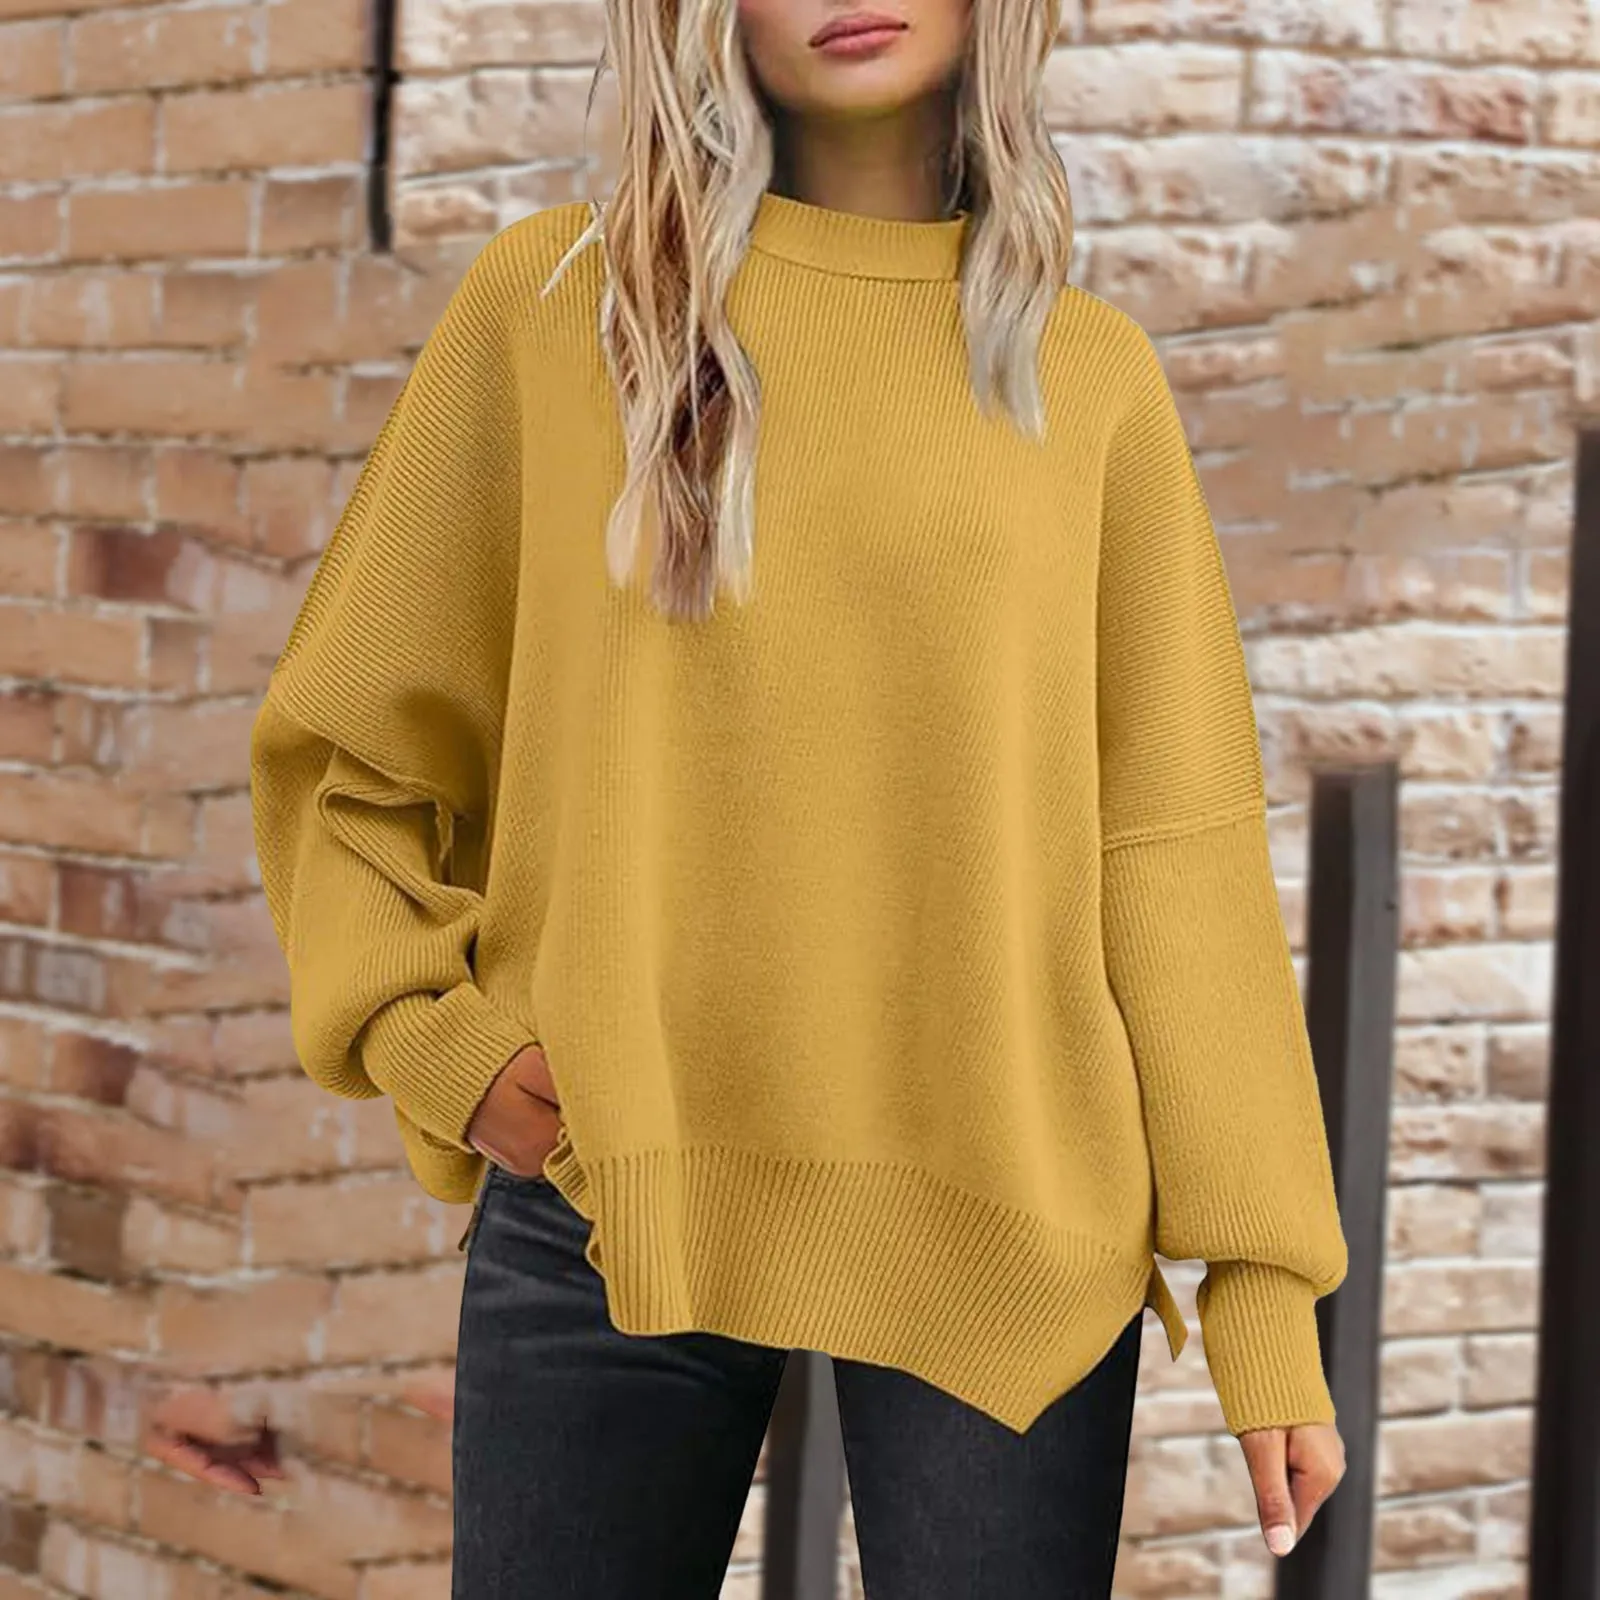 

Women New Knitted Side Slit Pullover Autumn Winter European American Round Neck Bat Wing Long Sleeved Sweater Fashion Tops